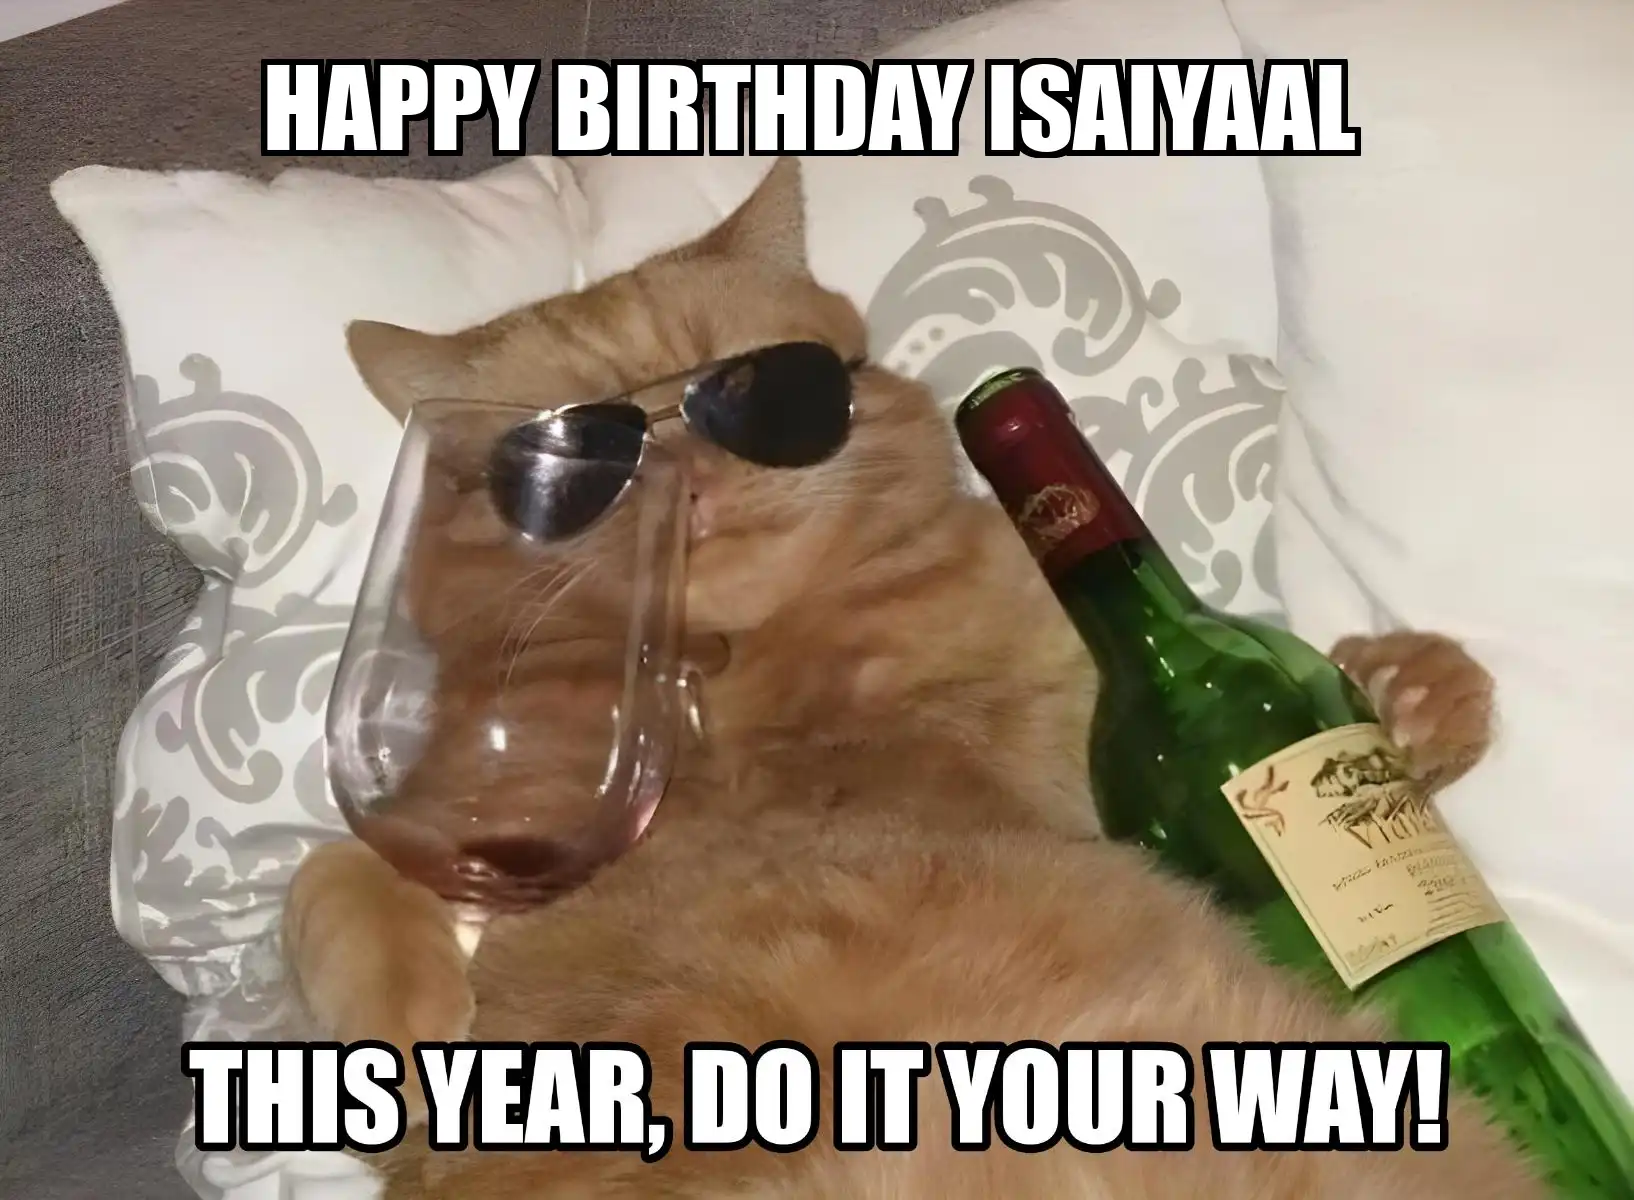 Happy Birthday Isaiyaal This Year Do It Your Way Meme